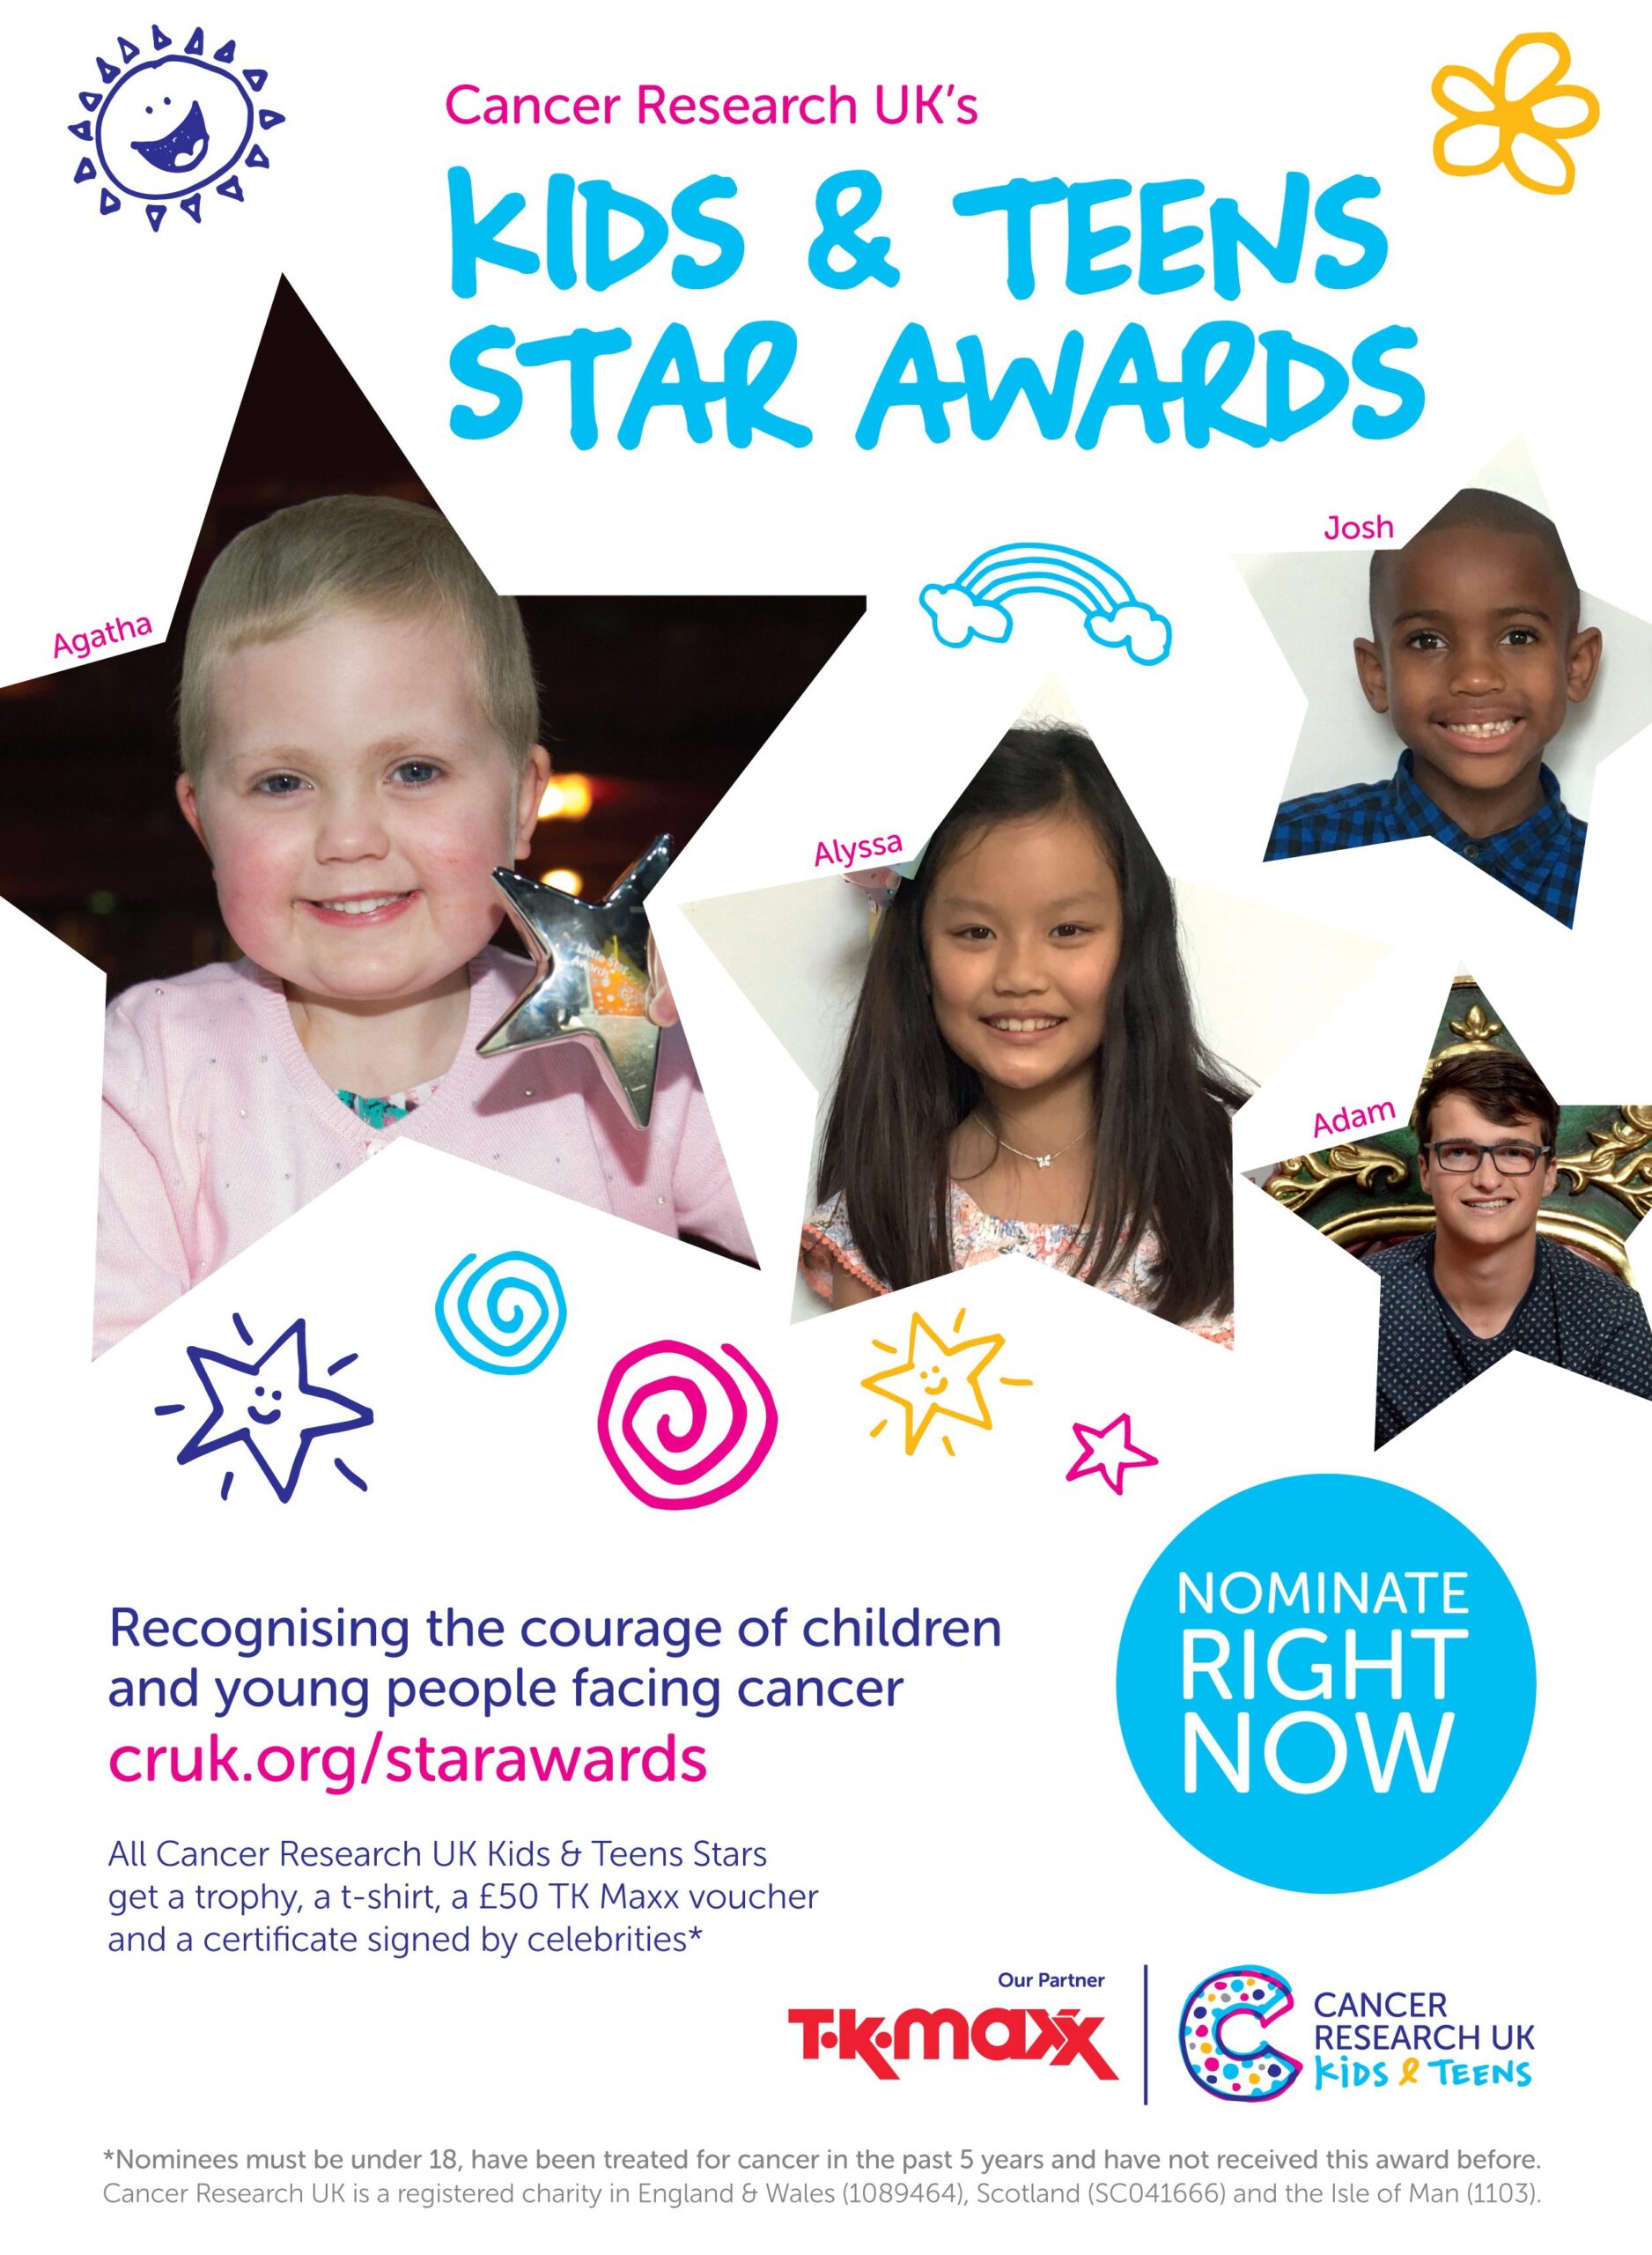 Cancer ResearchUK Star Awards 2018 poster which features Agatha King aged seven from Fife who has overcome leukaemia scaled